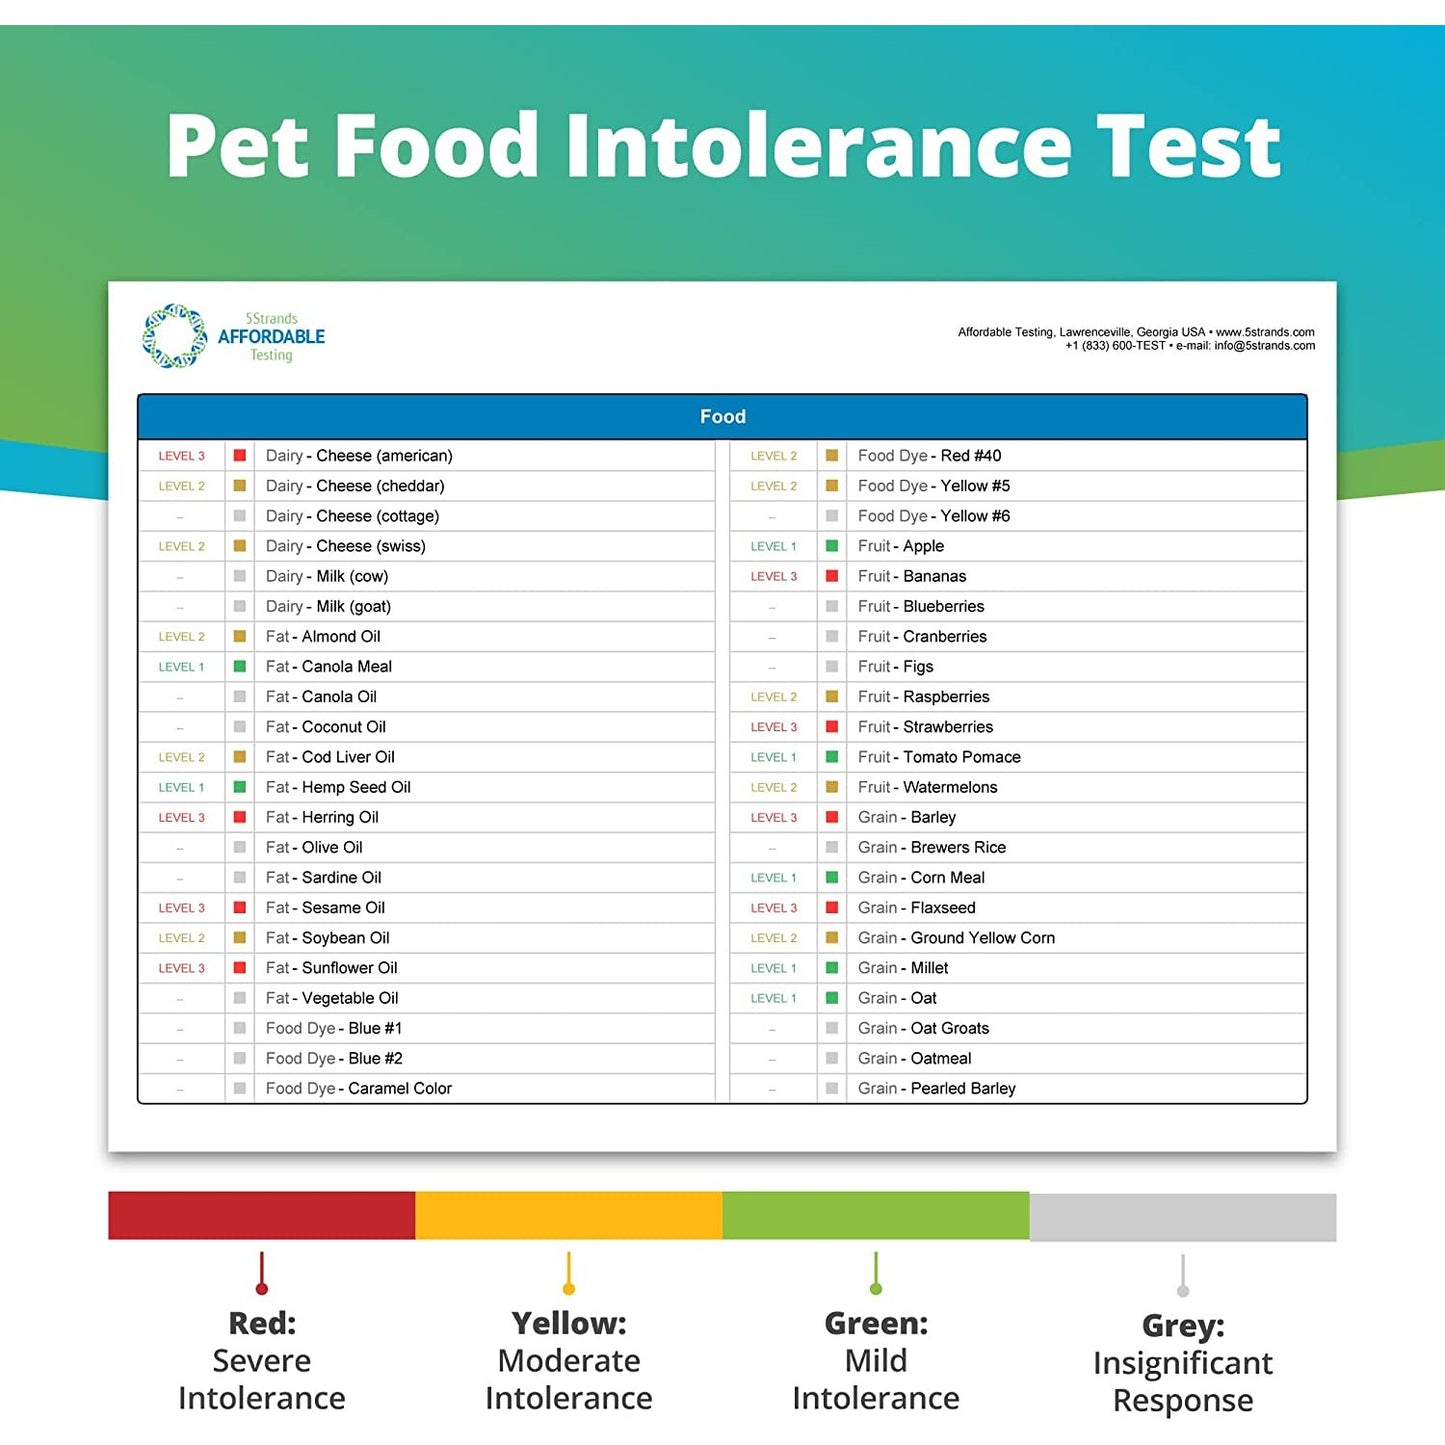 Information about a pet food intolerance test for cats and dogs.